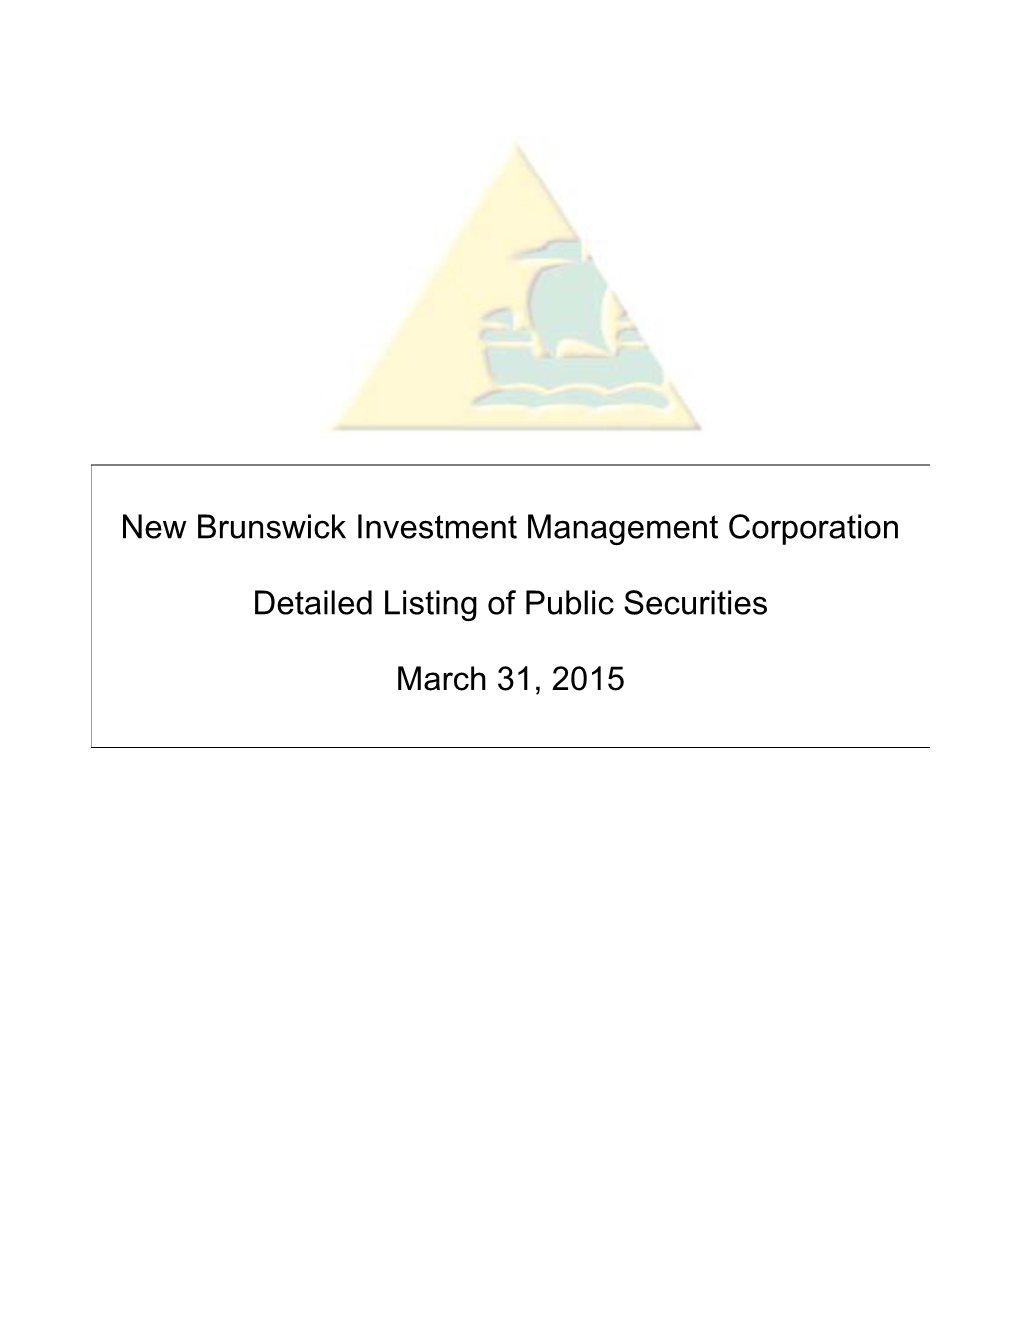 NEW BRUNSWICK INVESTMENT MANAGEMENT CORPORATION Detailed Holdings at March 31, 2015